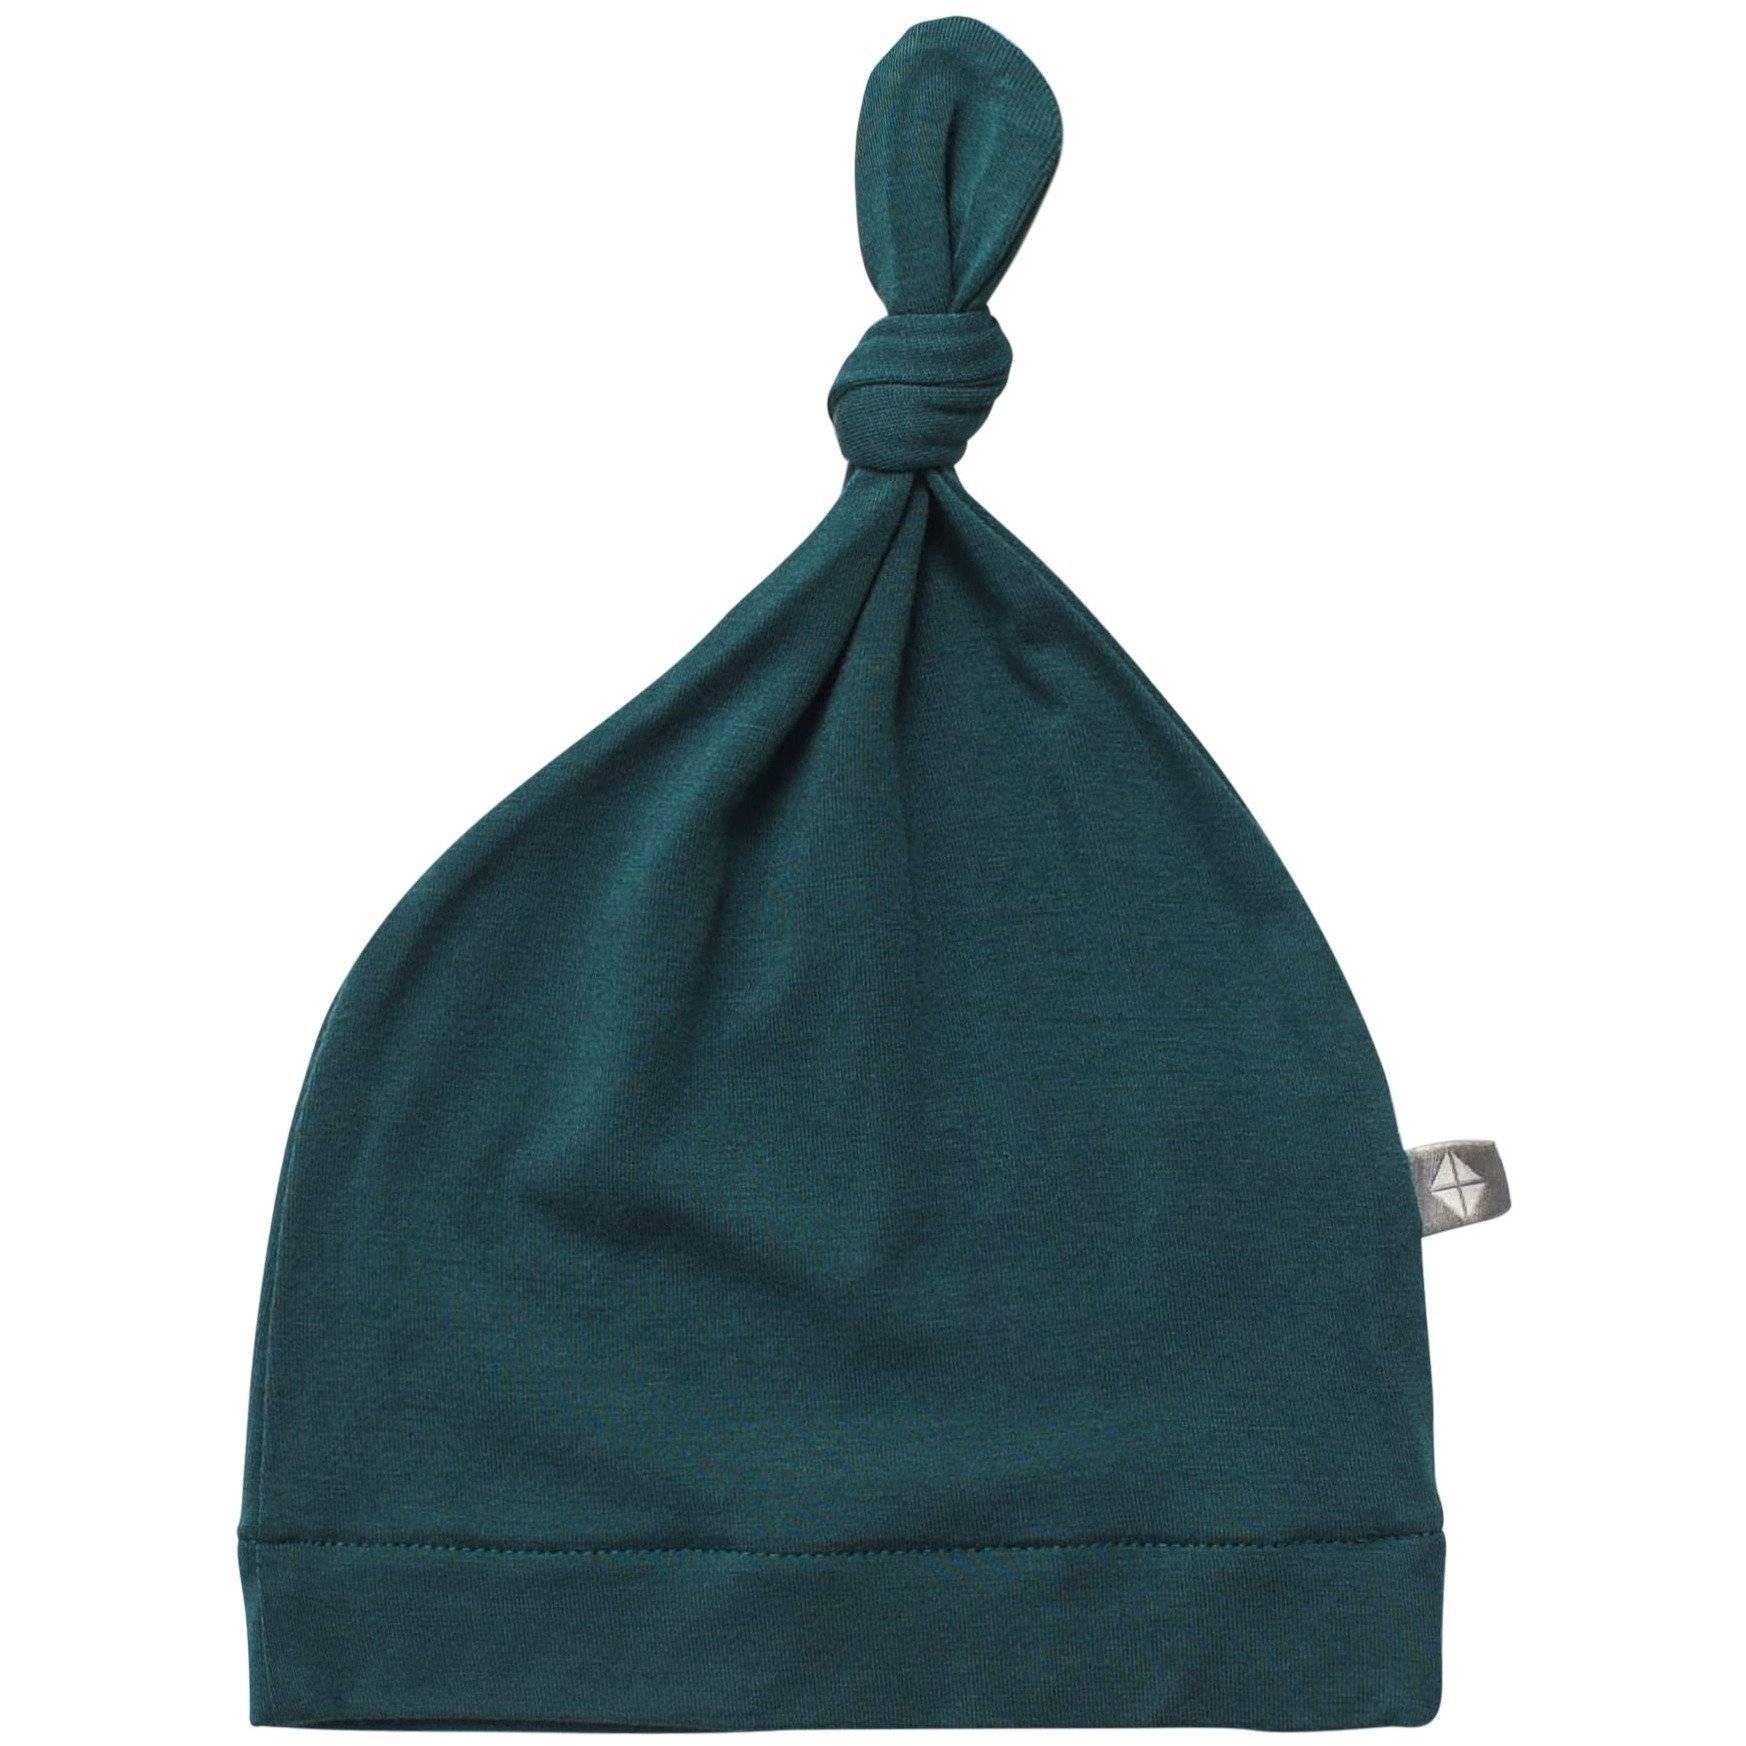 Knotted Cap in Emerald | Kyte BABY